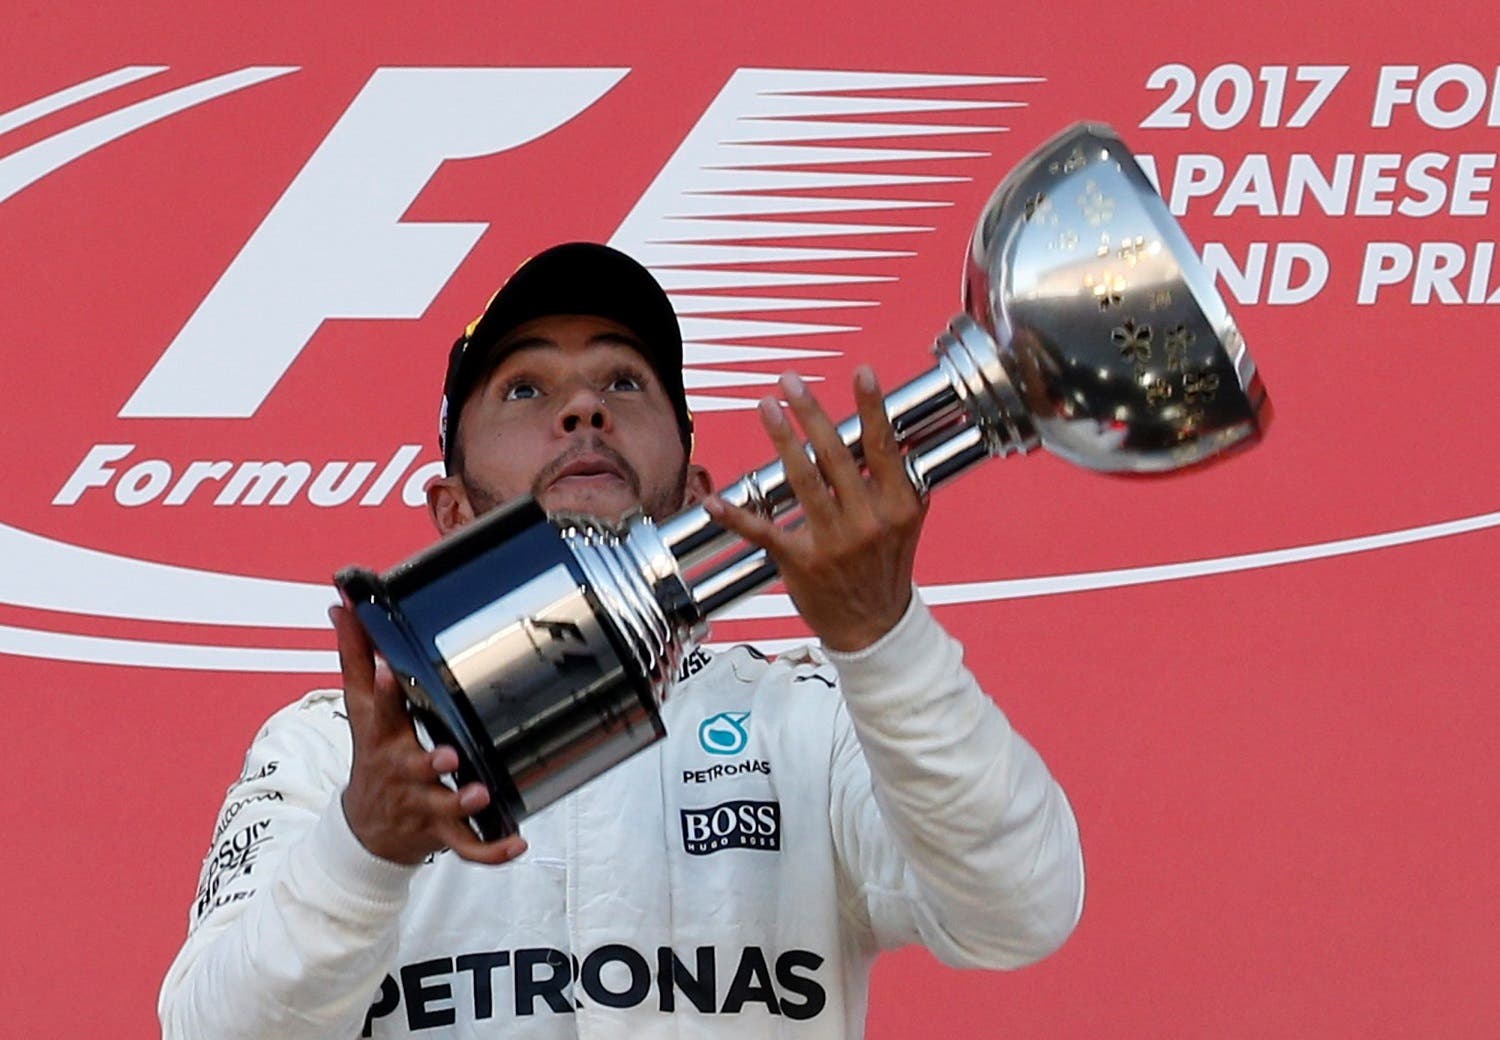 Mercedes’ Lewis Hamilton of Britain throws his trophy into the air as he celebrates winning the Japanese Grand Prix 2017 race. (Reuters)